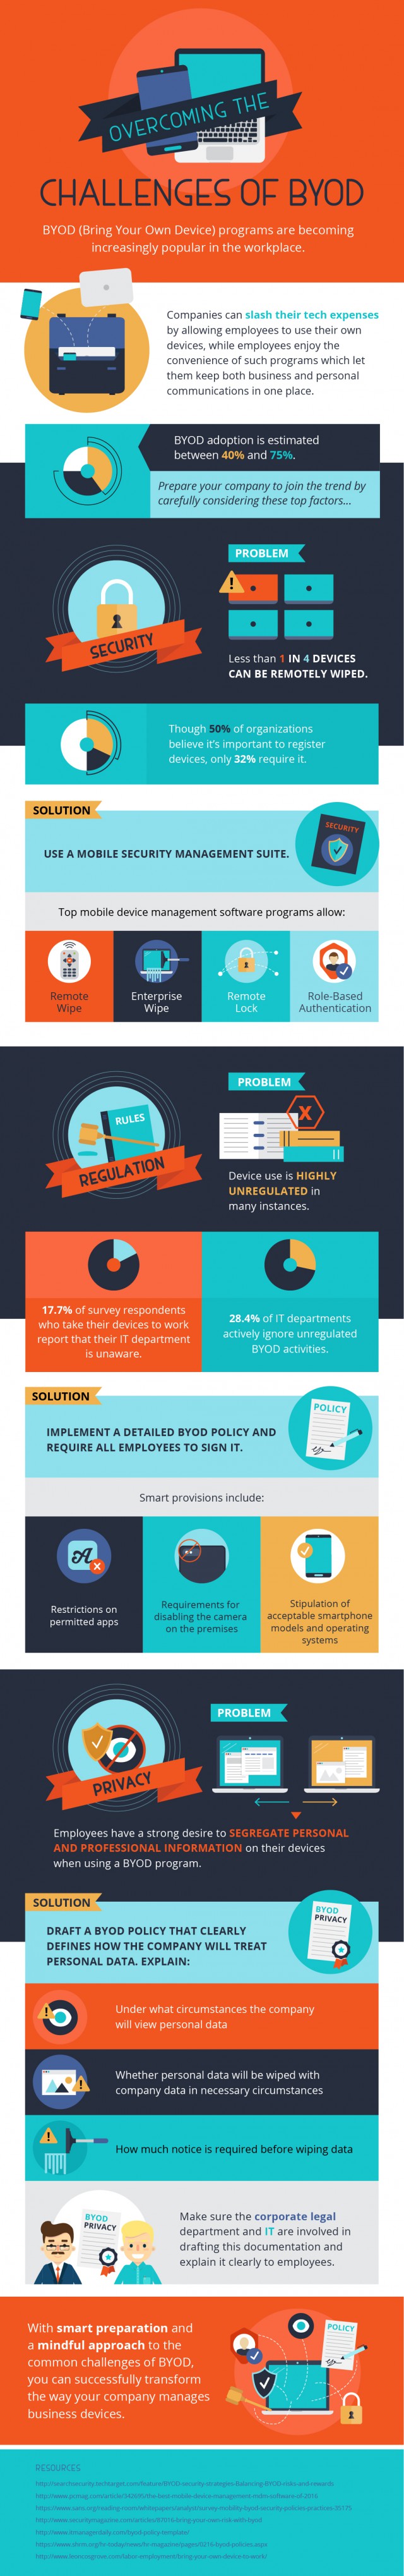 BYOD Challenges Infographic